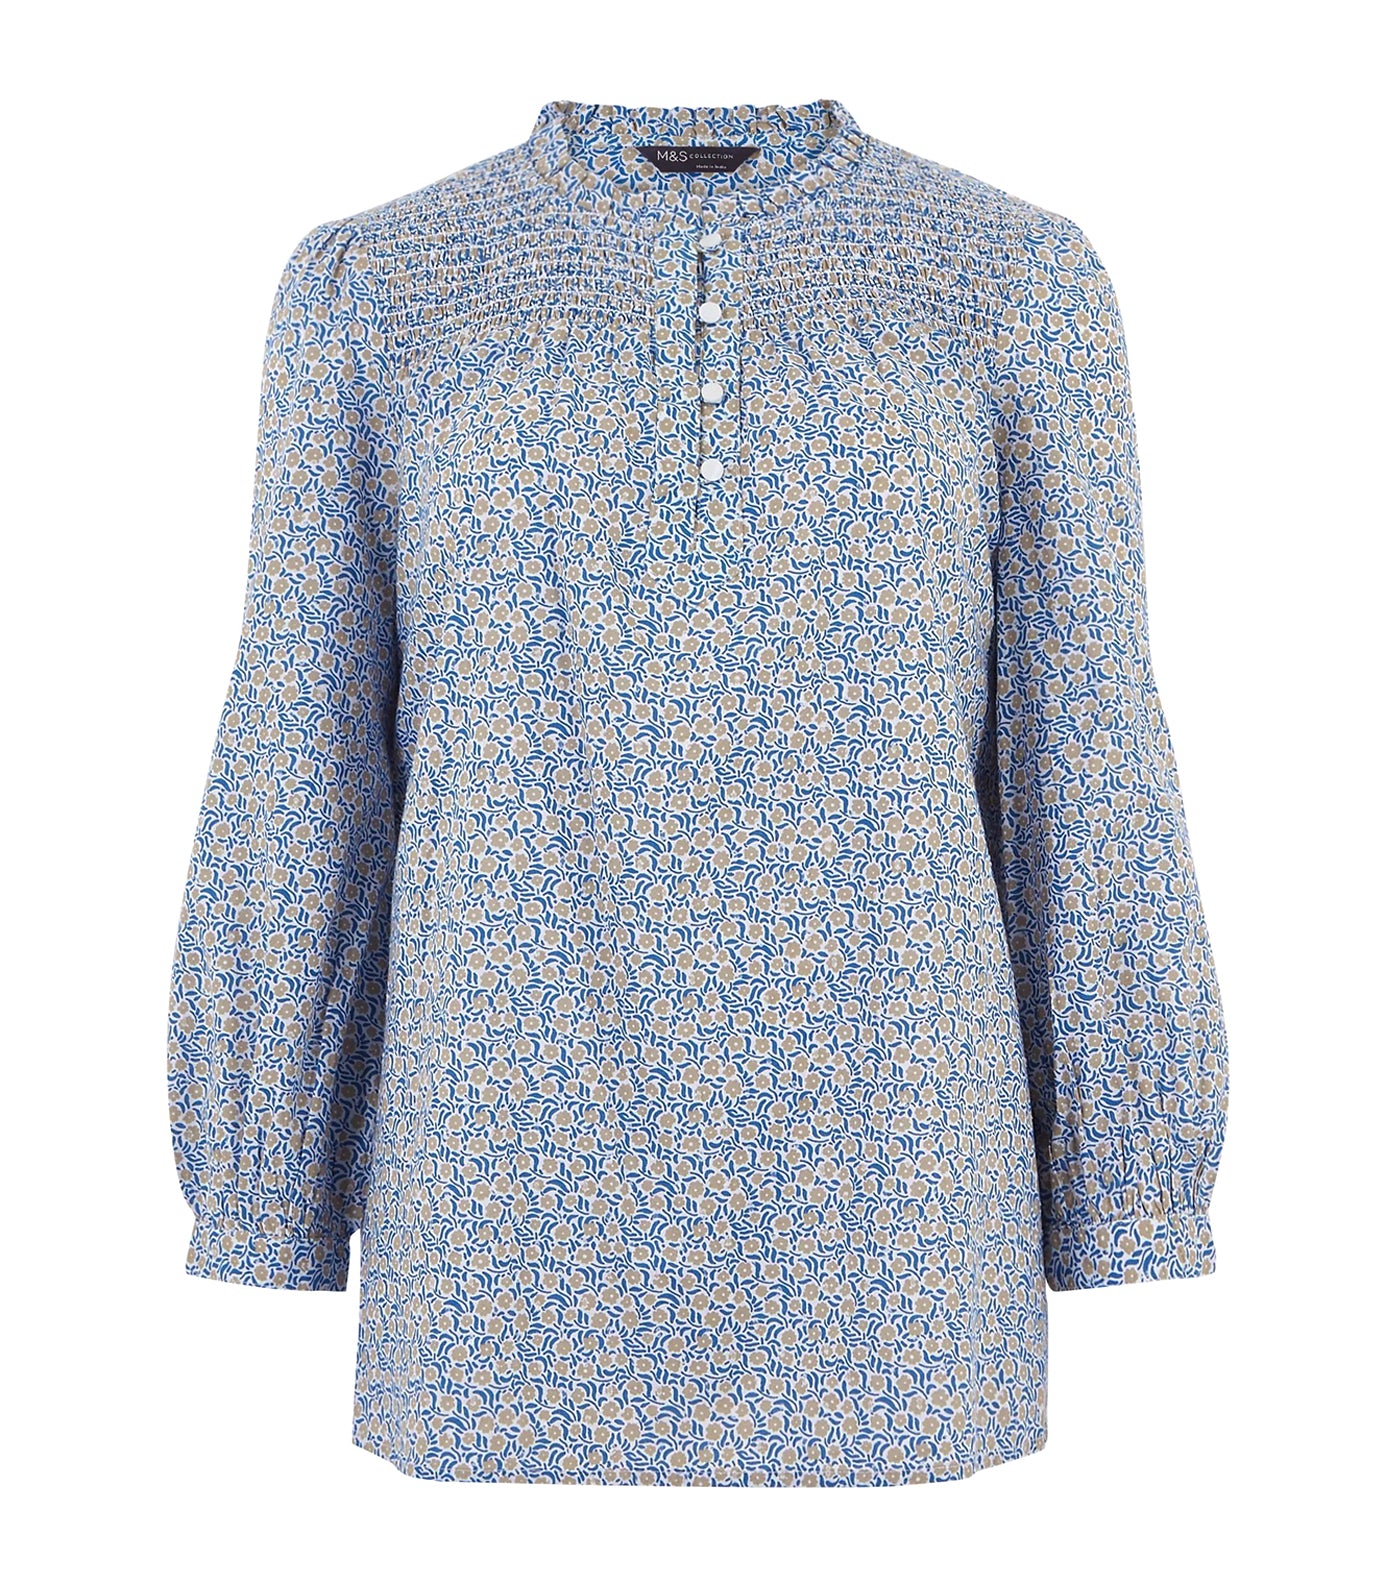 Cotton Printed Long Sleeve Blouse Blue